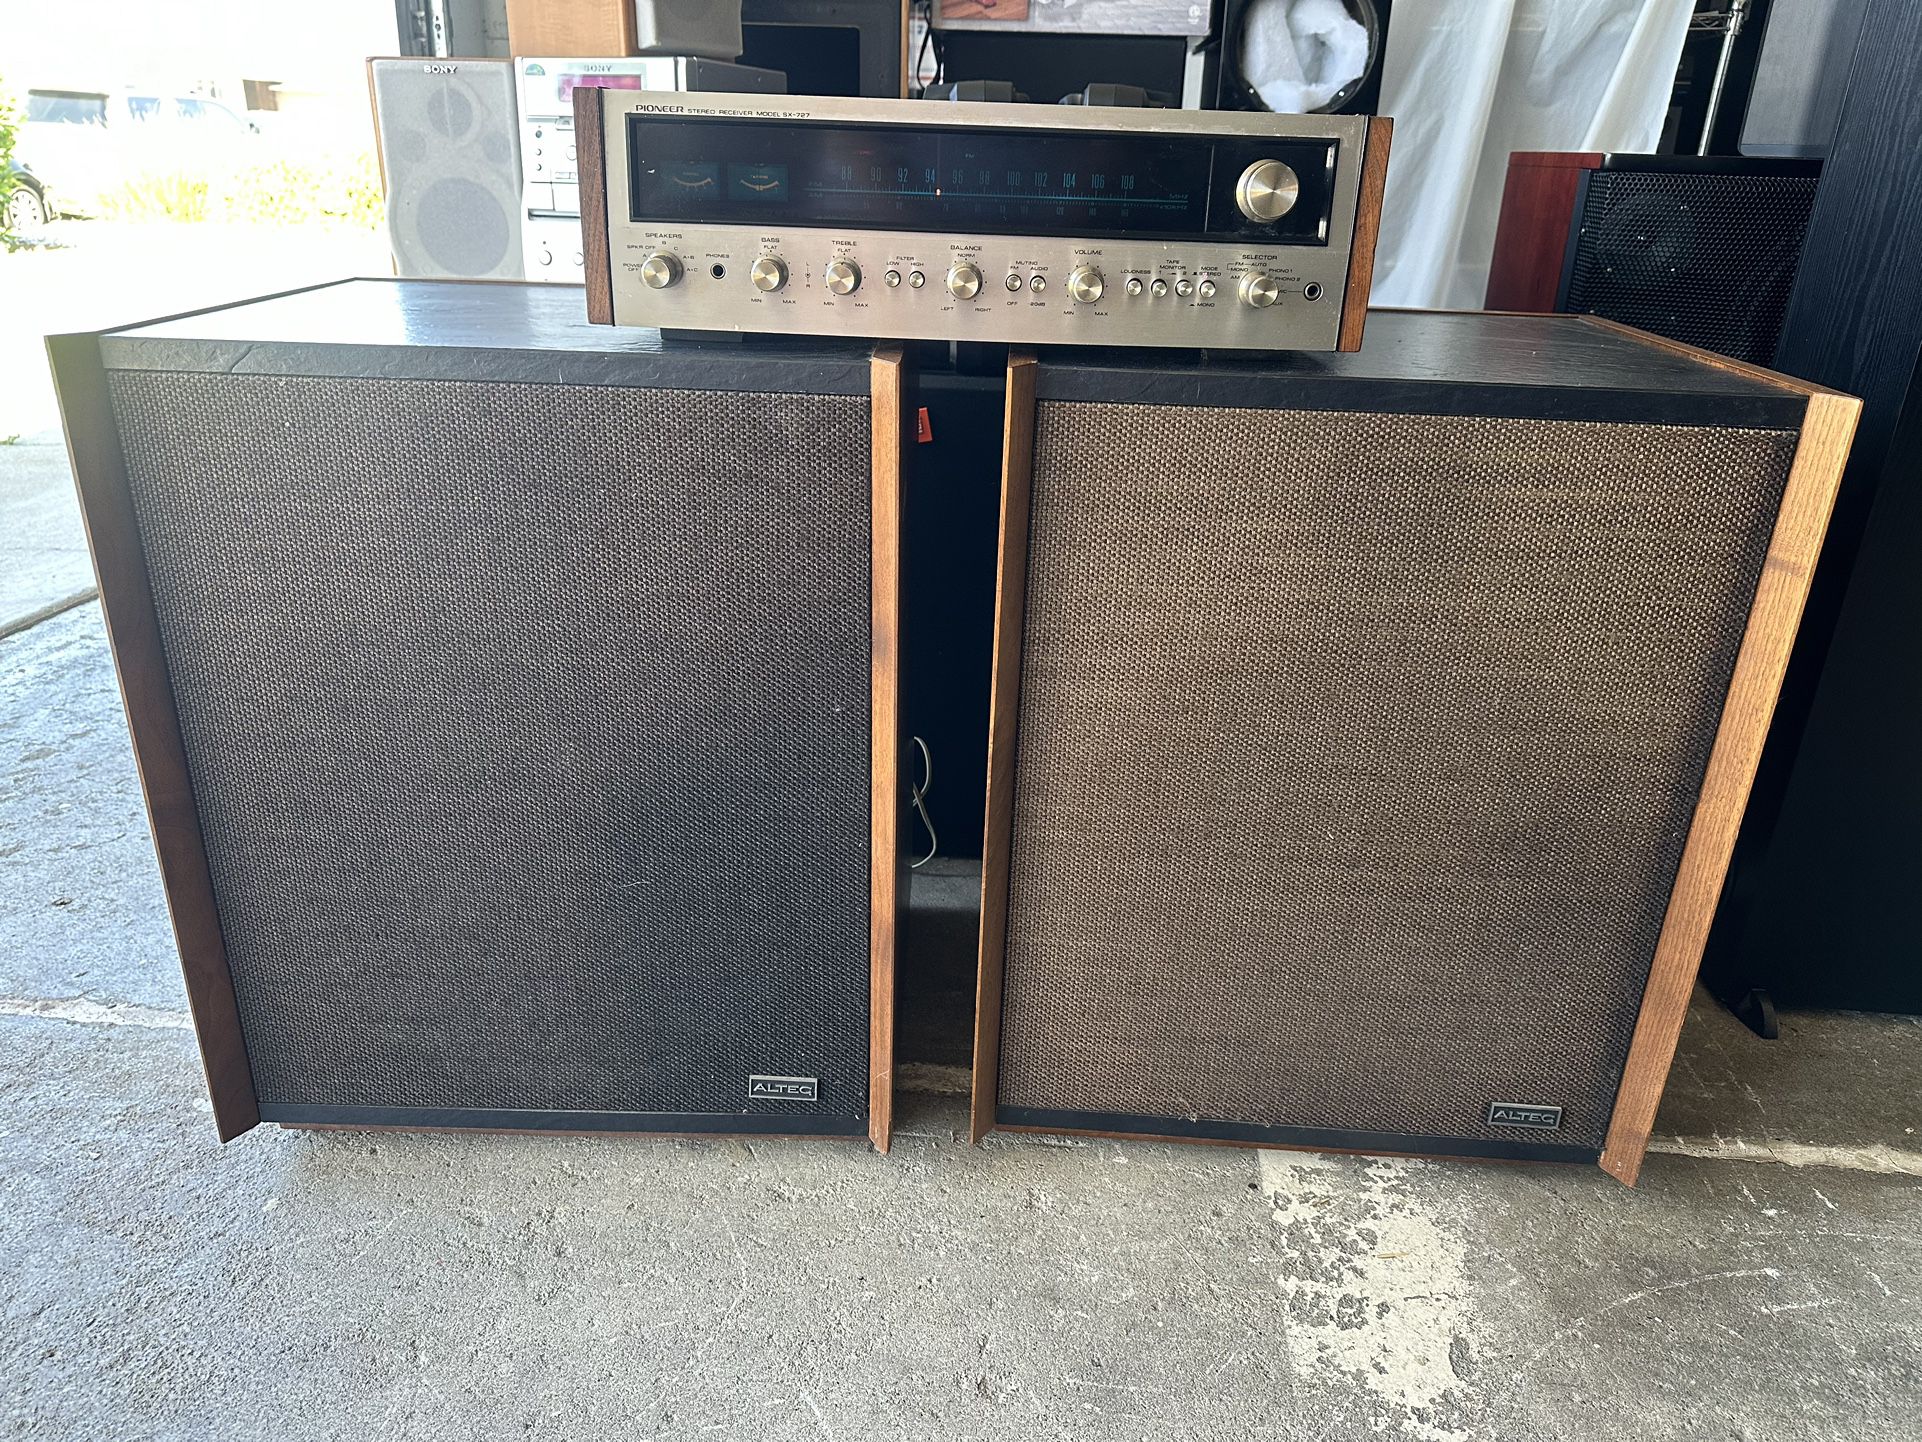 ALTEC LANSING SPEAKERS 879A SANTANA , 15” WOOFER AND Vintage PIONEER SX-727 STEREO RECEIVER 